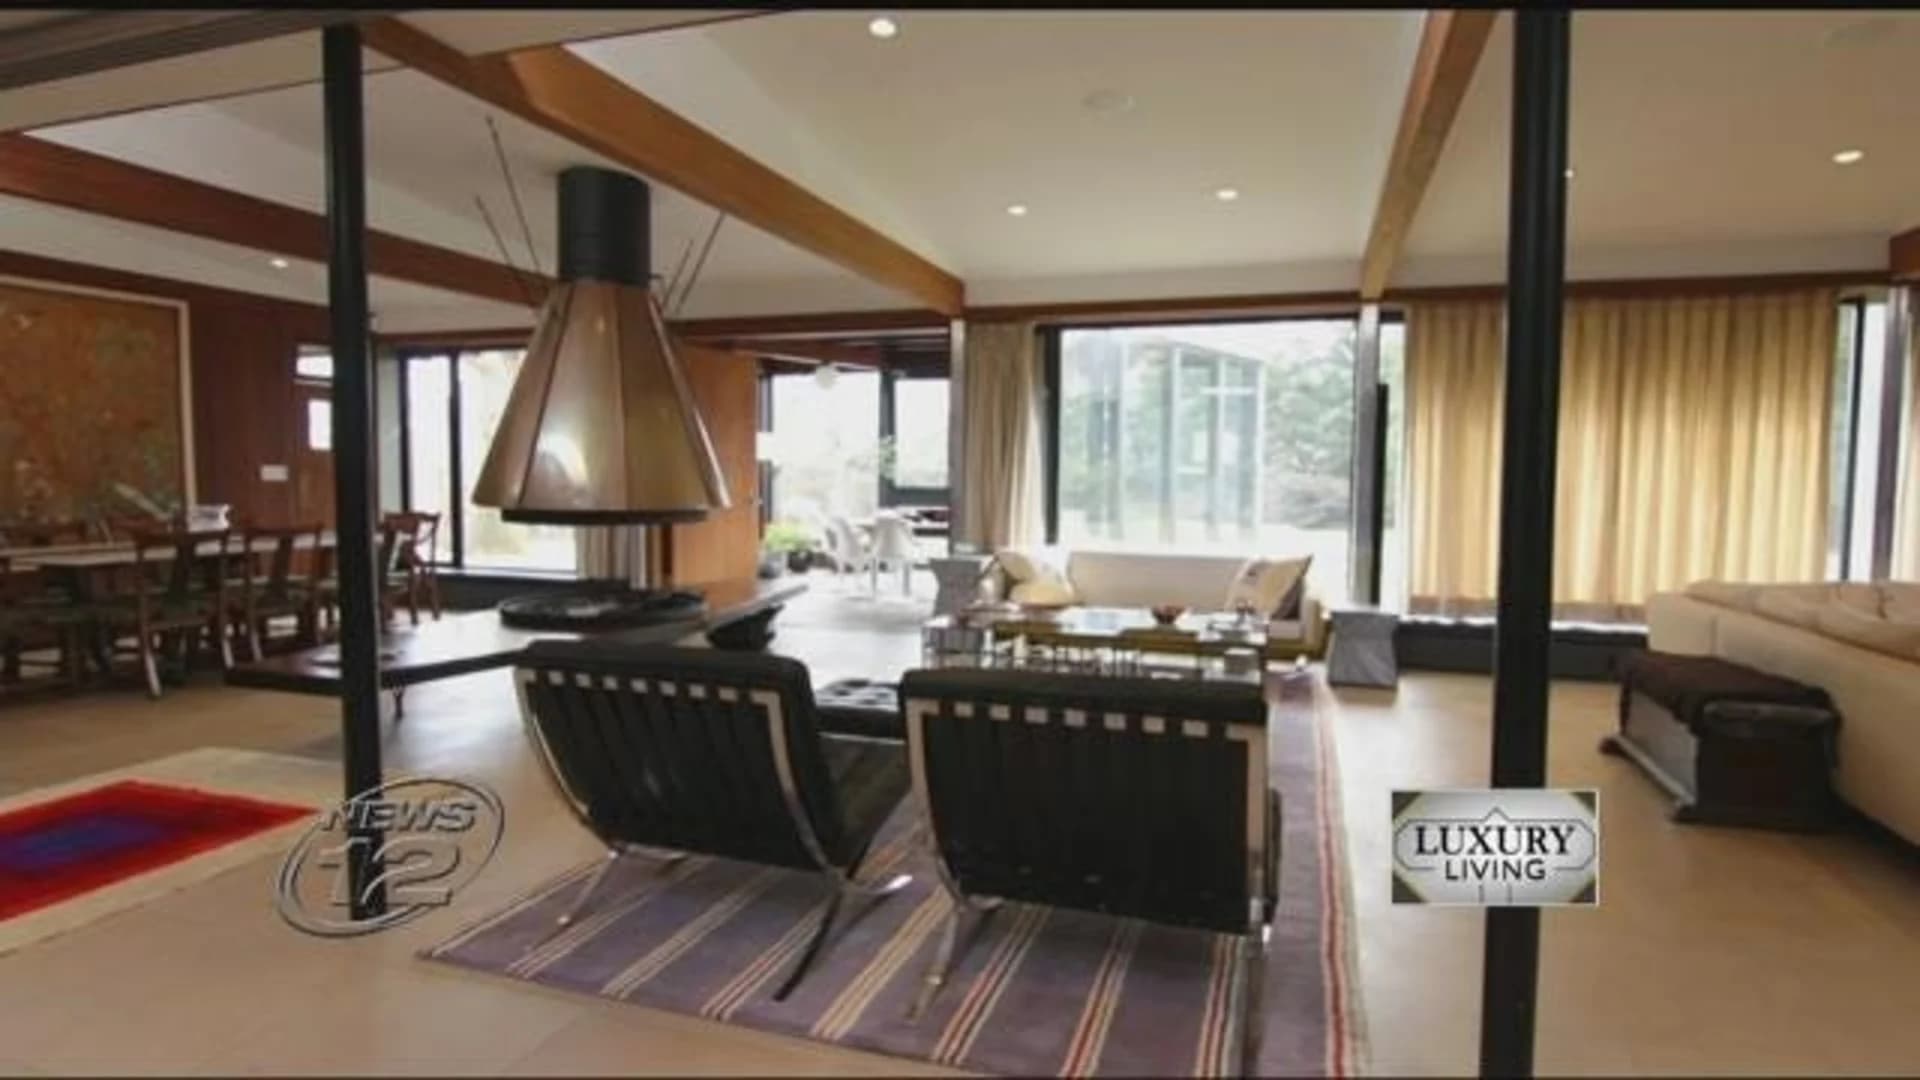 Luxury Living -  A look inside Hudson Valley homes